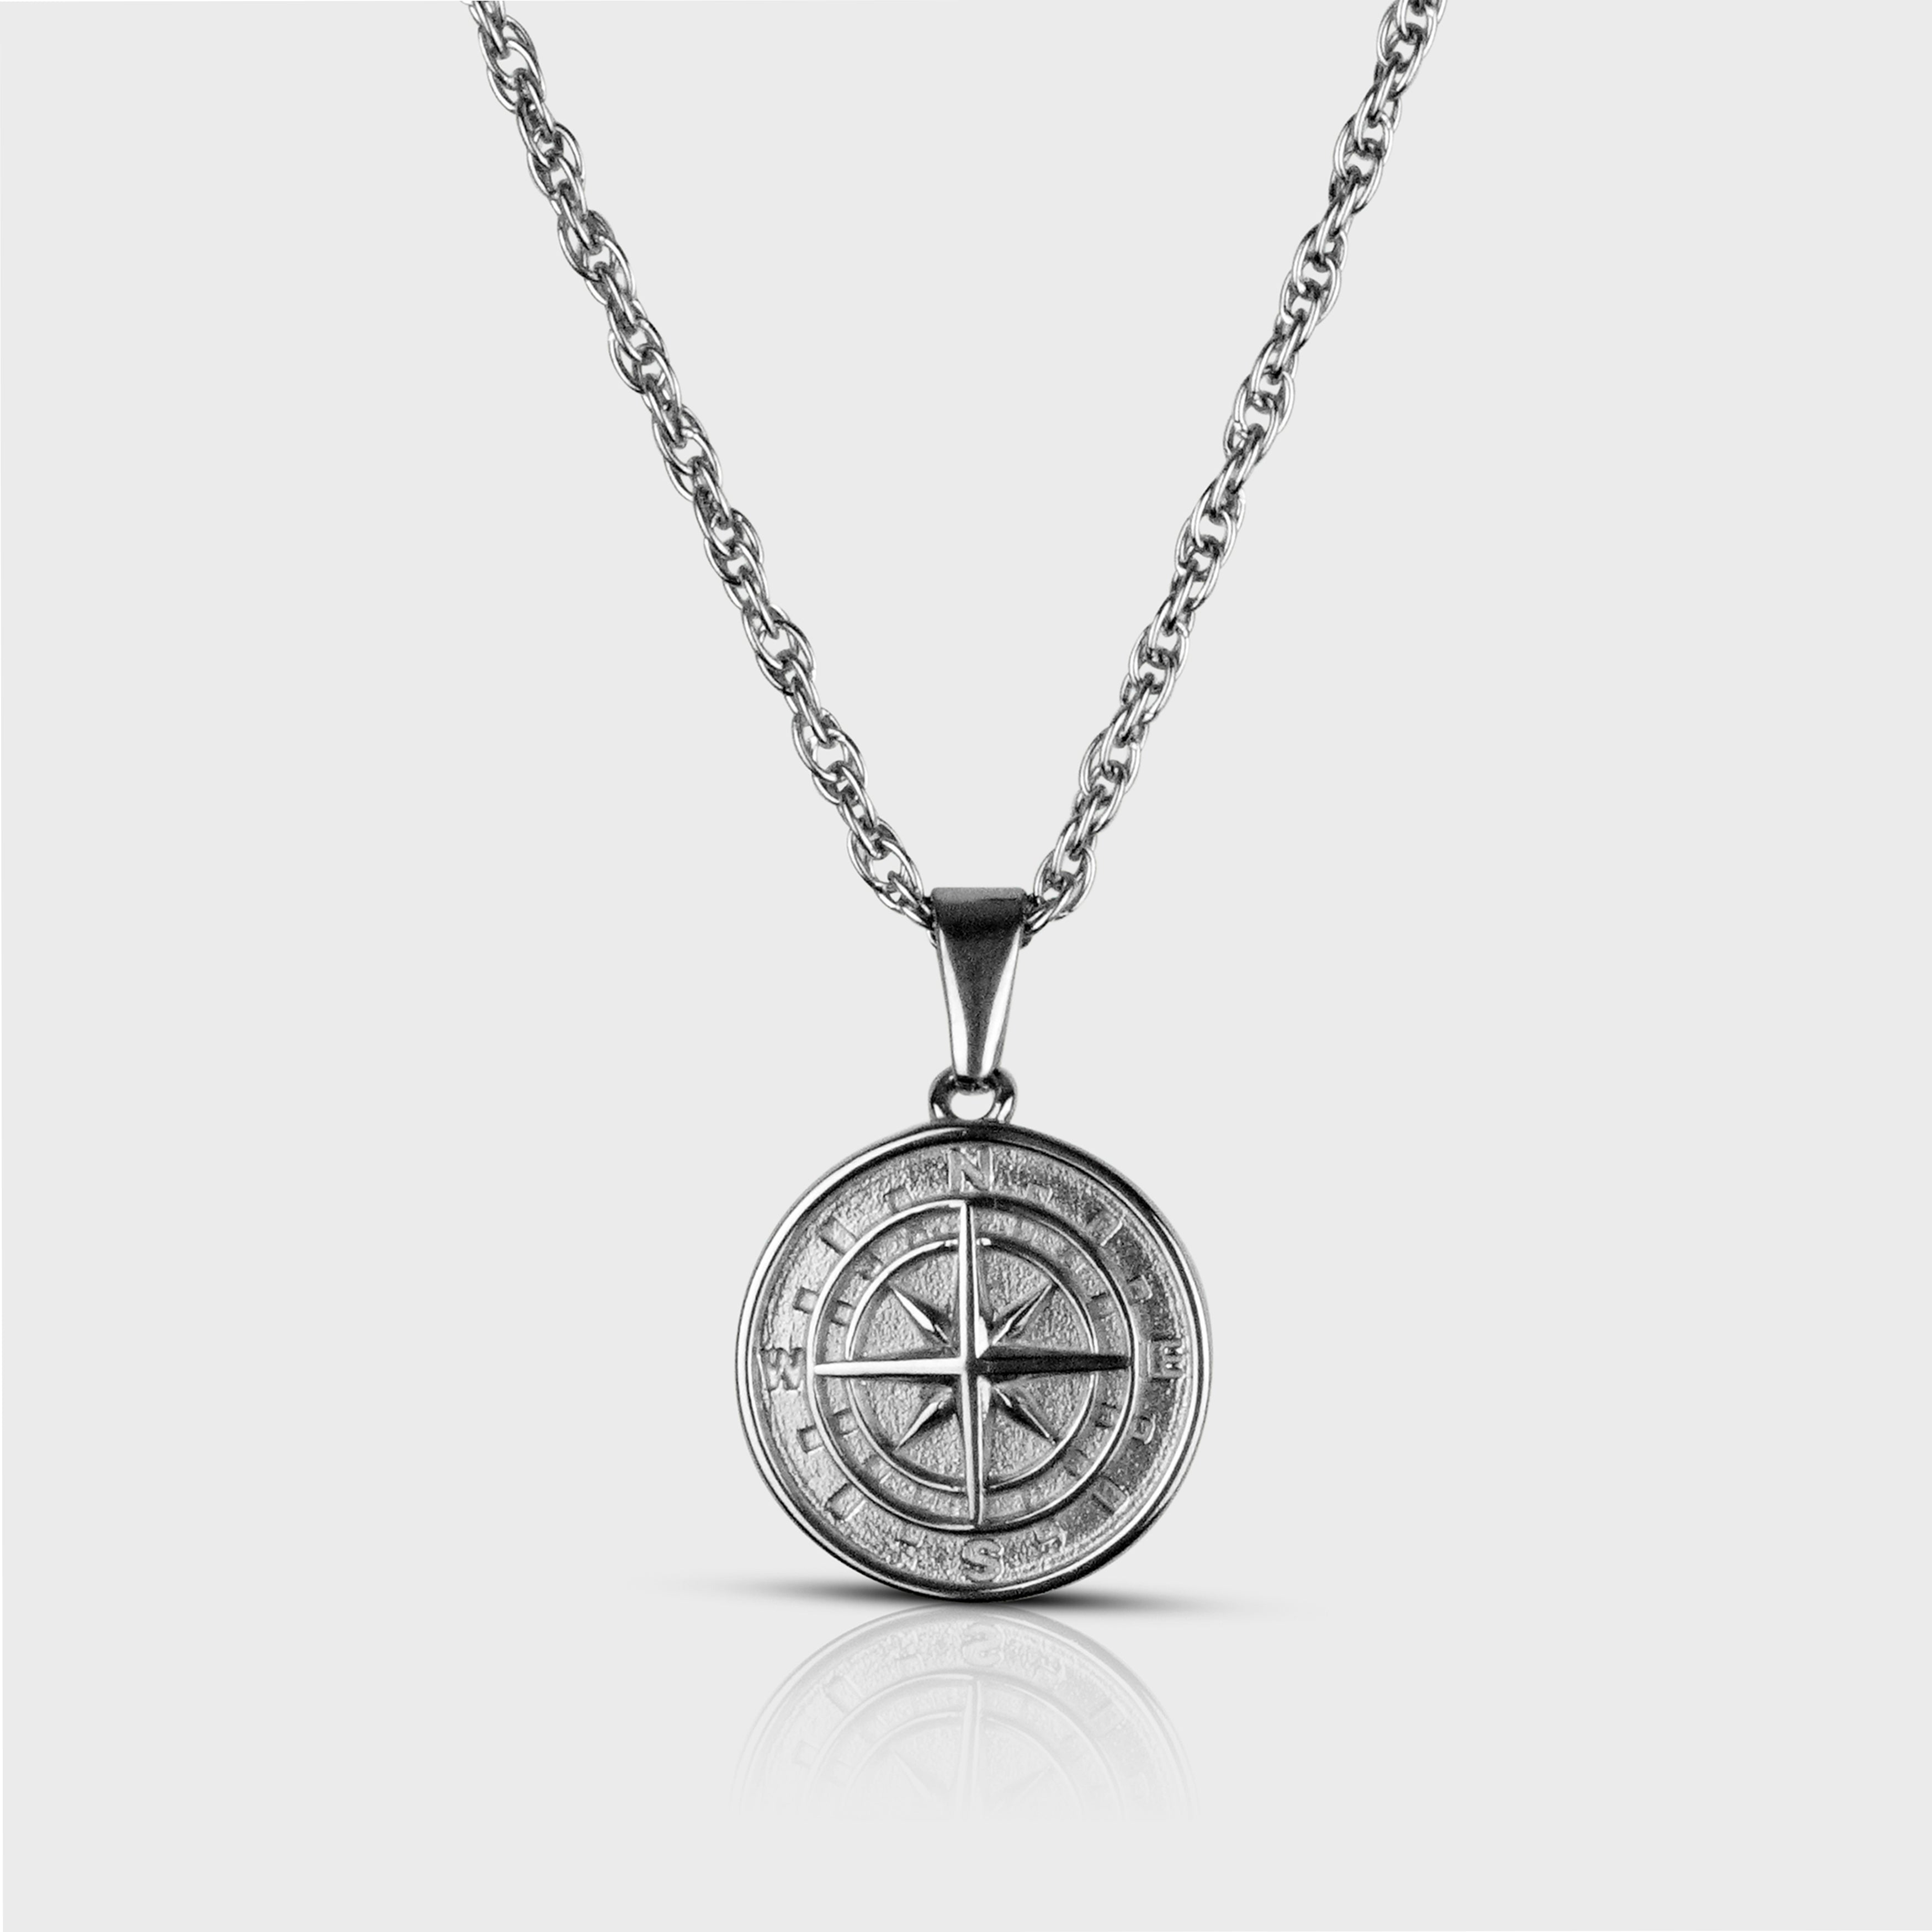 COMPASS NECKLACE - SILVER